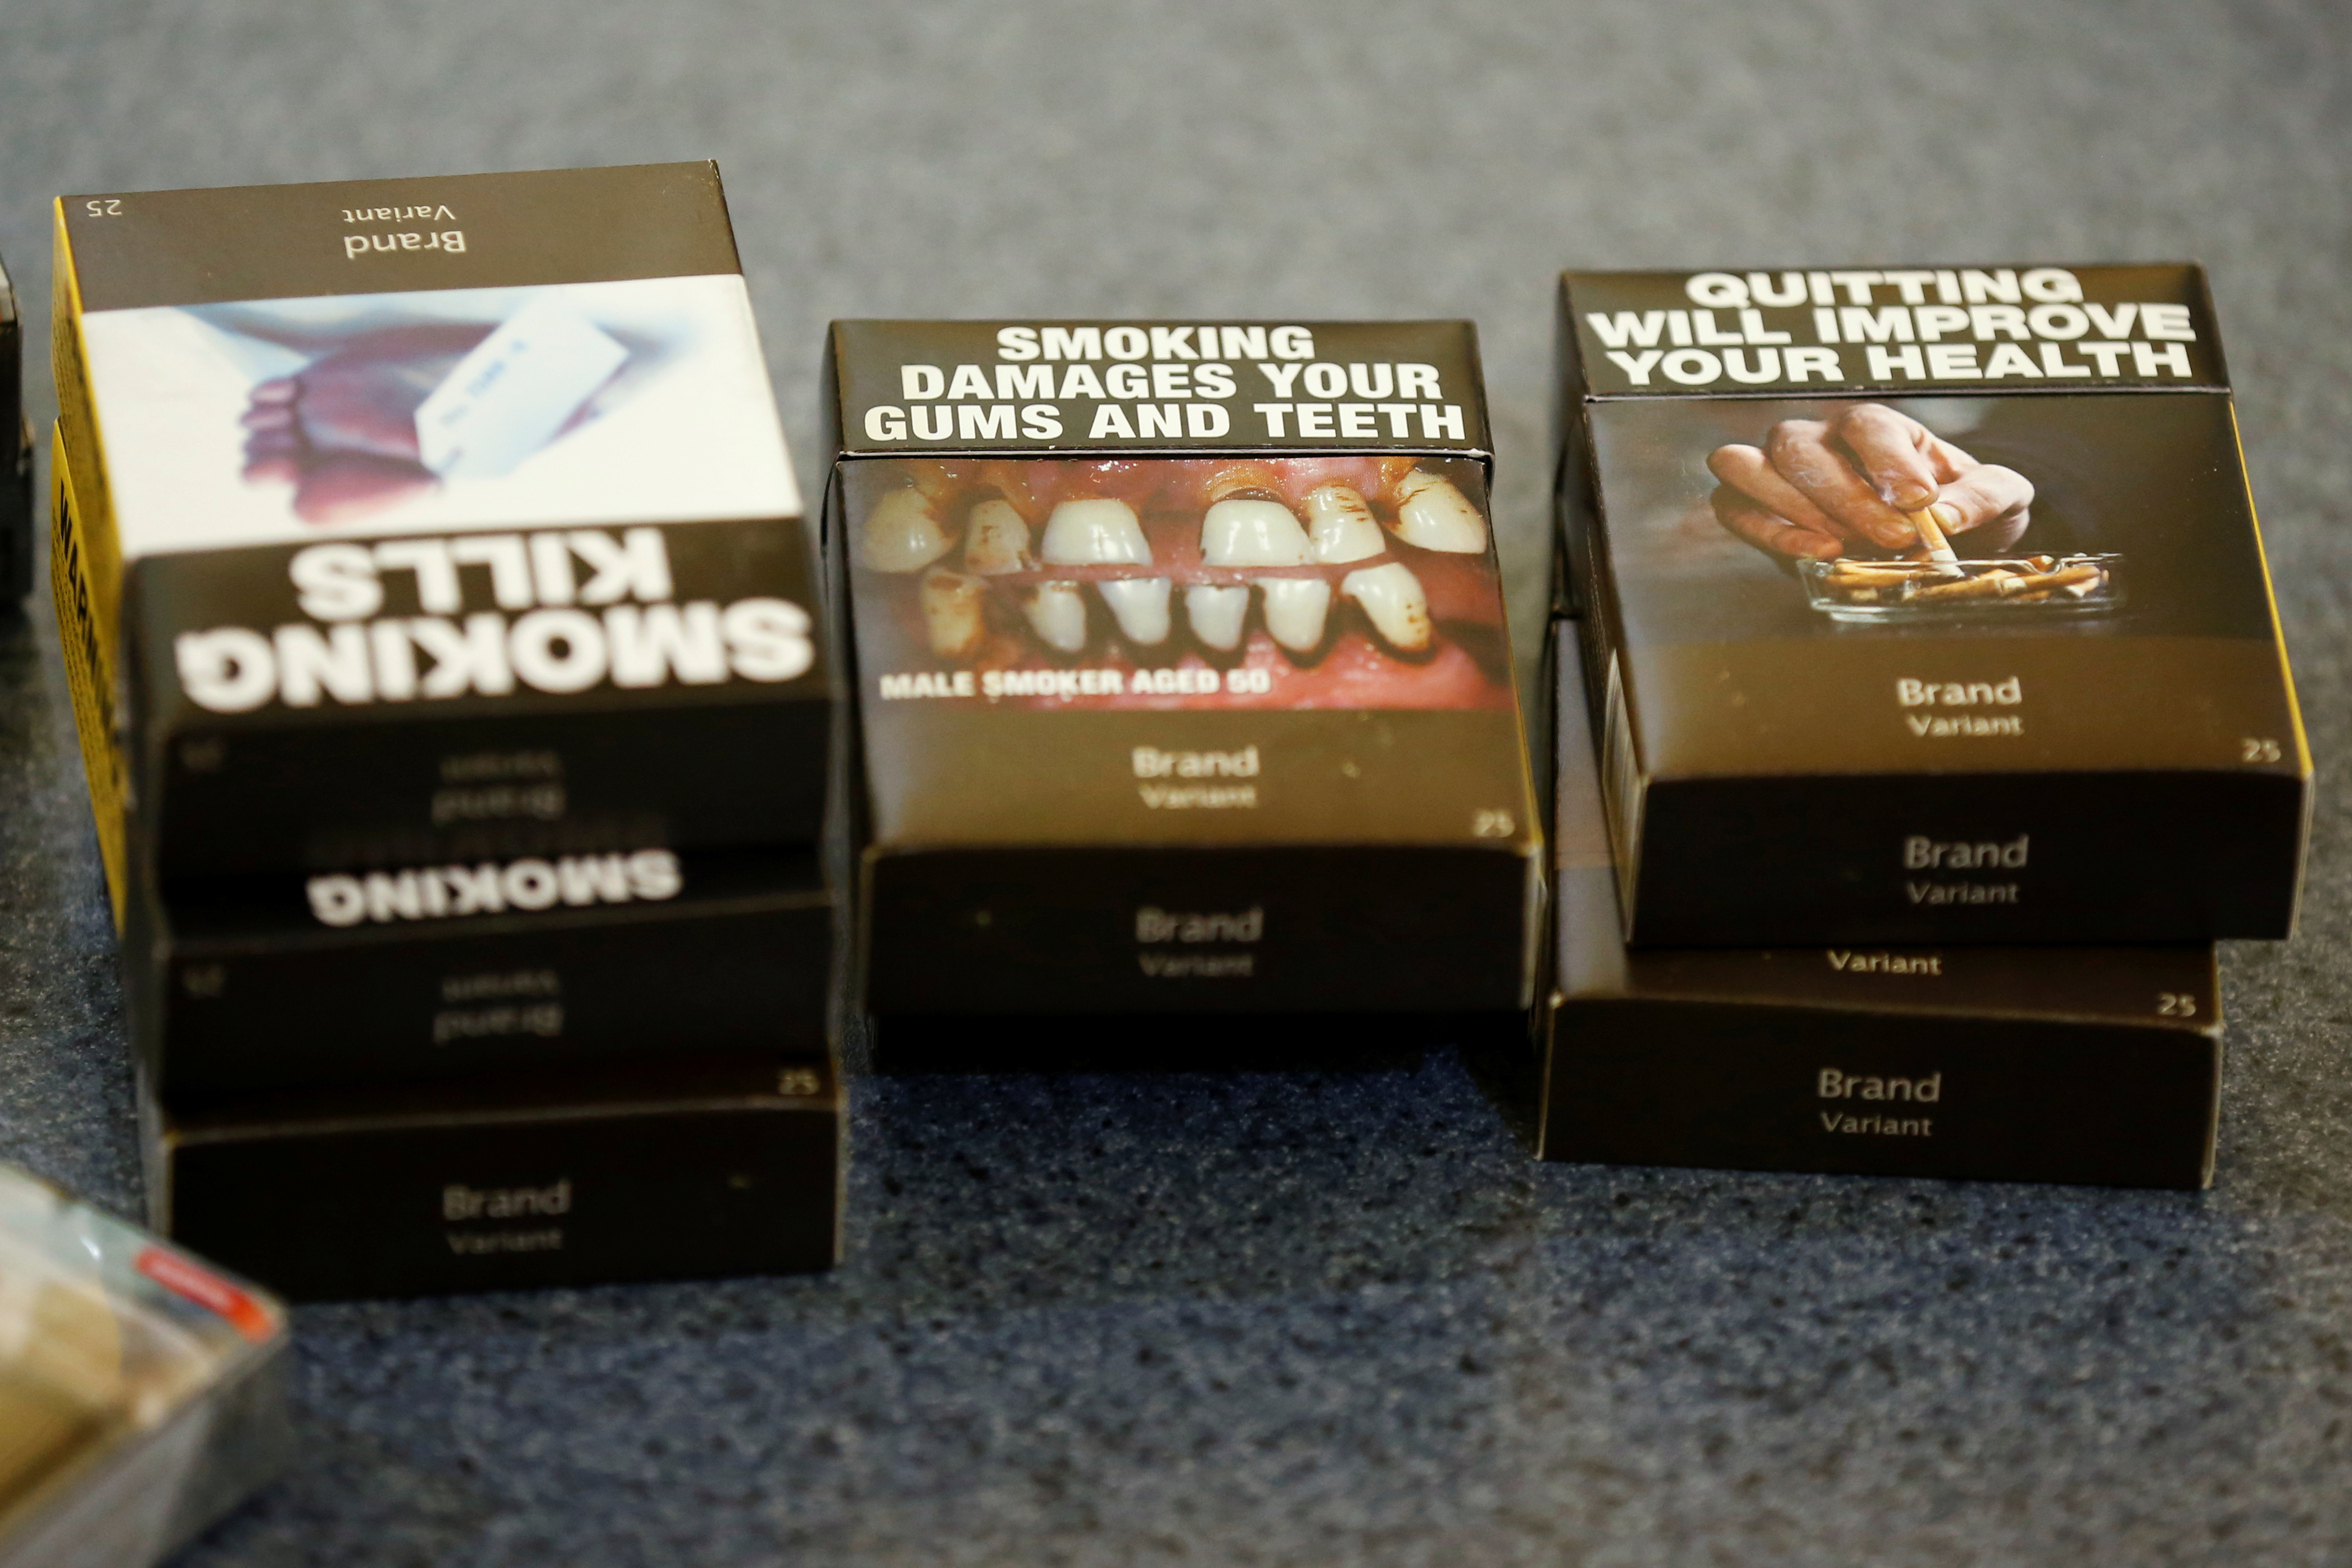 Mock-ups of plain cigarette packaging are seen before the start of a news conference in Ottawa